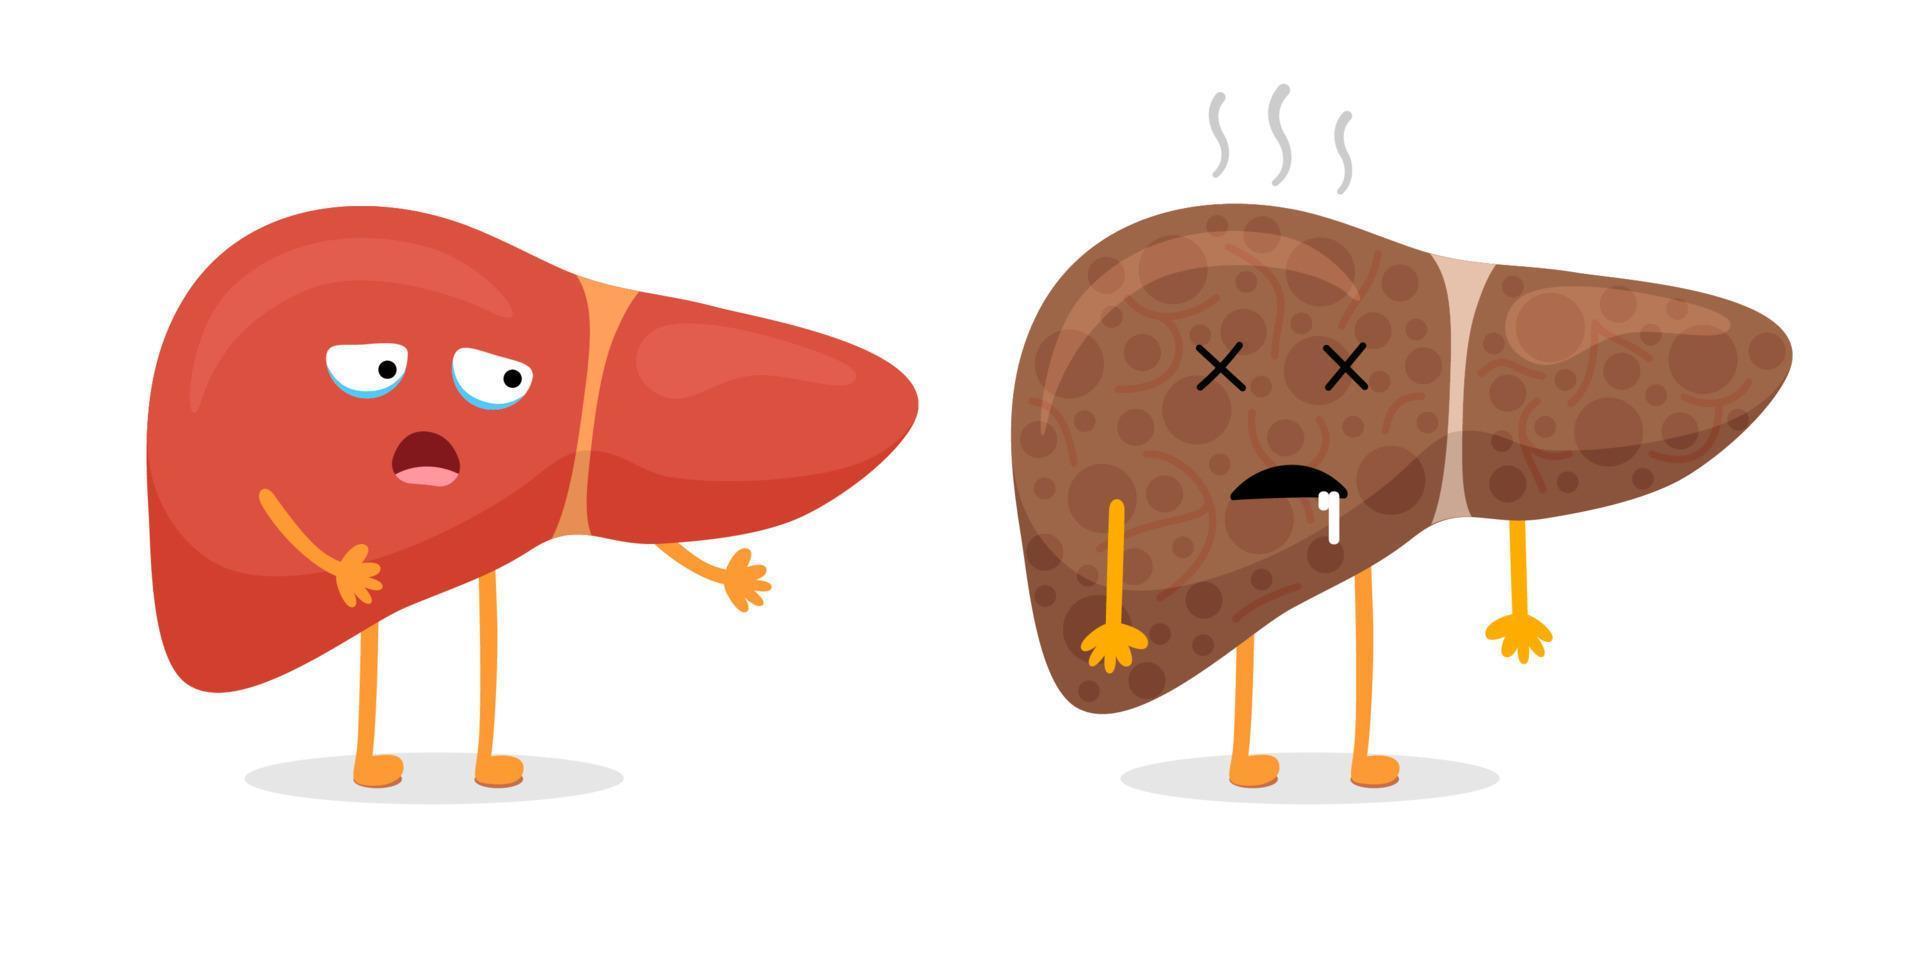 Liver character healthy and unhealthy comparison. Mascot good and bad condition. Cartoon exocrine system gland internal organ scared and illness sad. Strong and damaged insides. Vector illustration